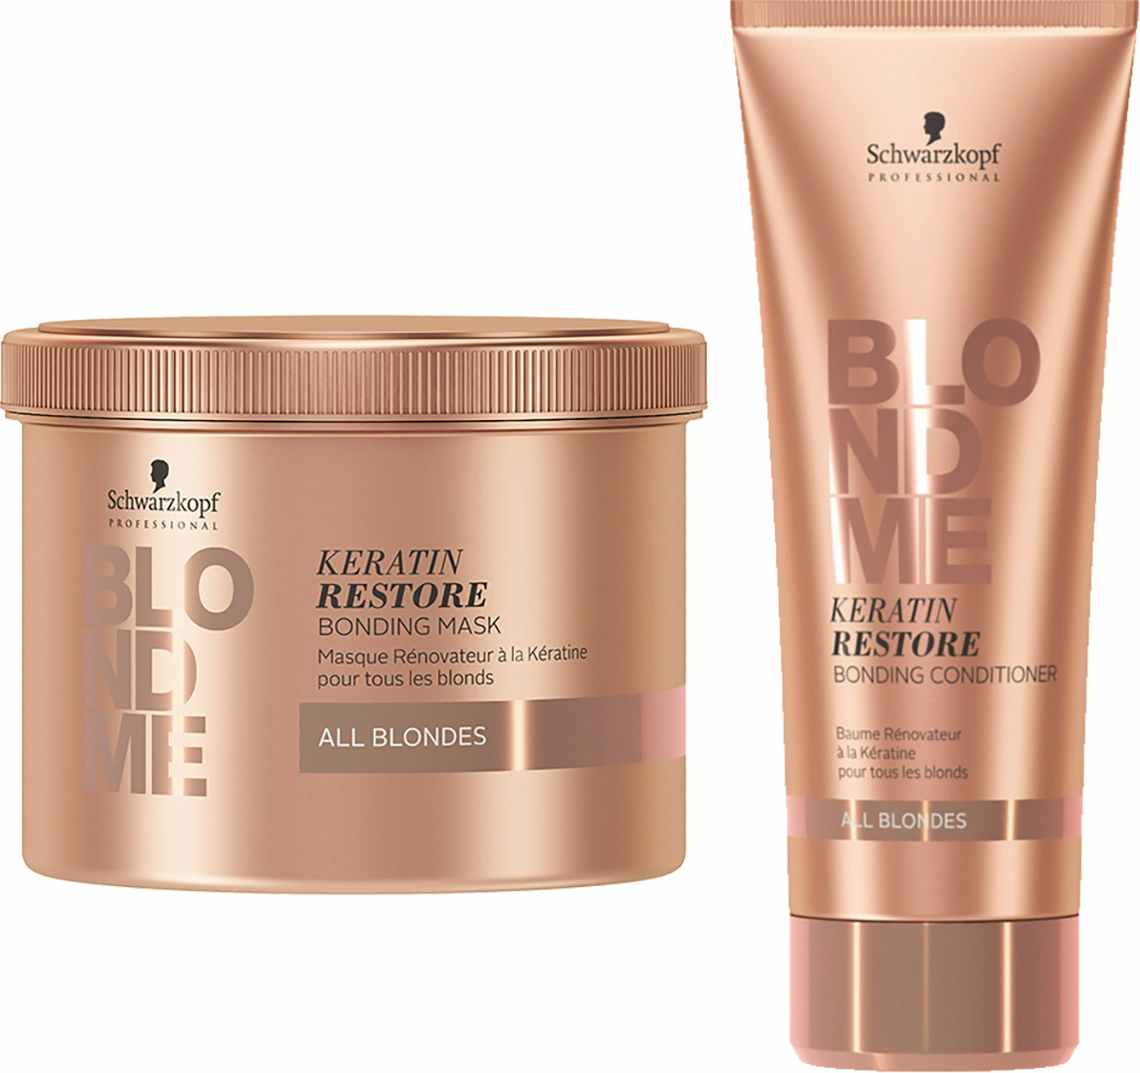 Two Blondme hair products